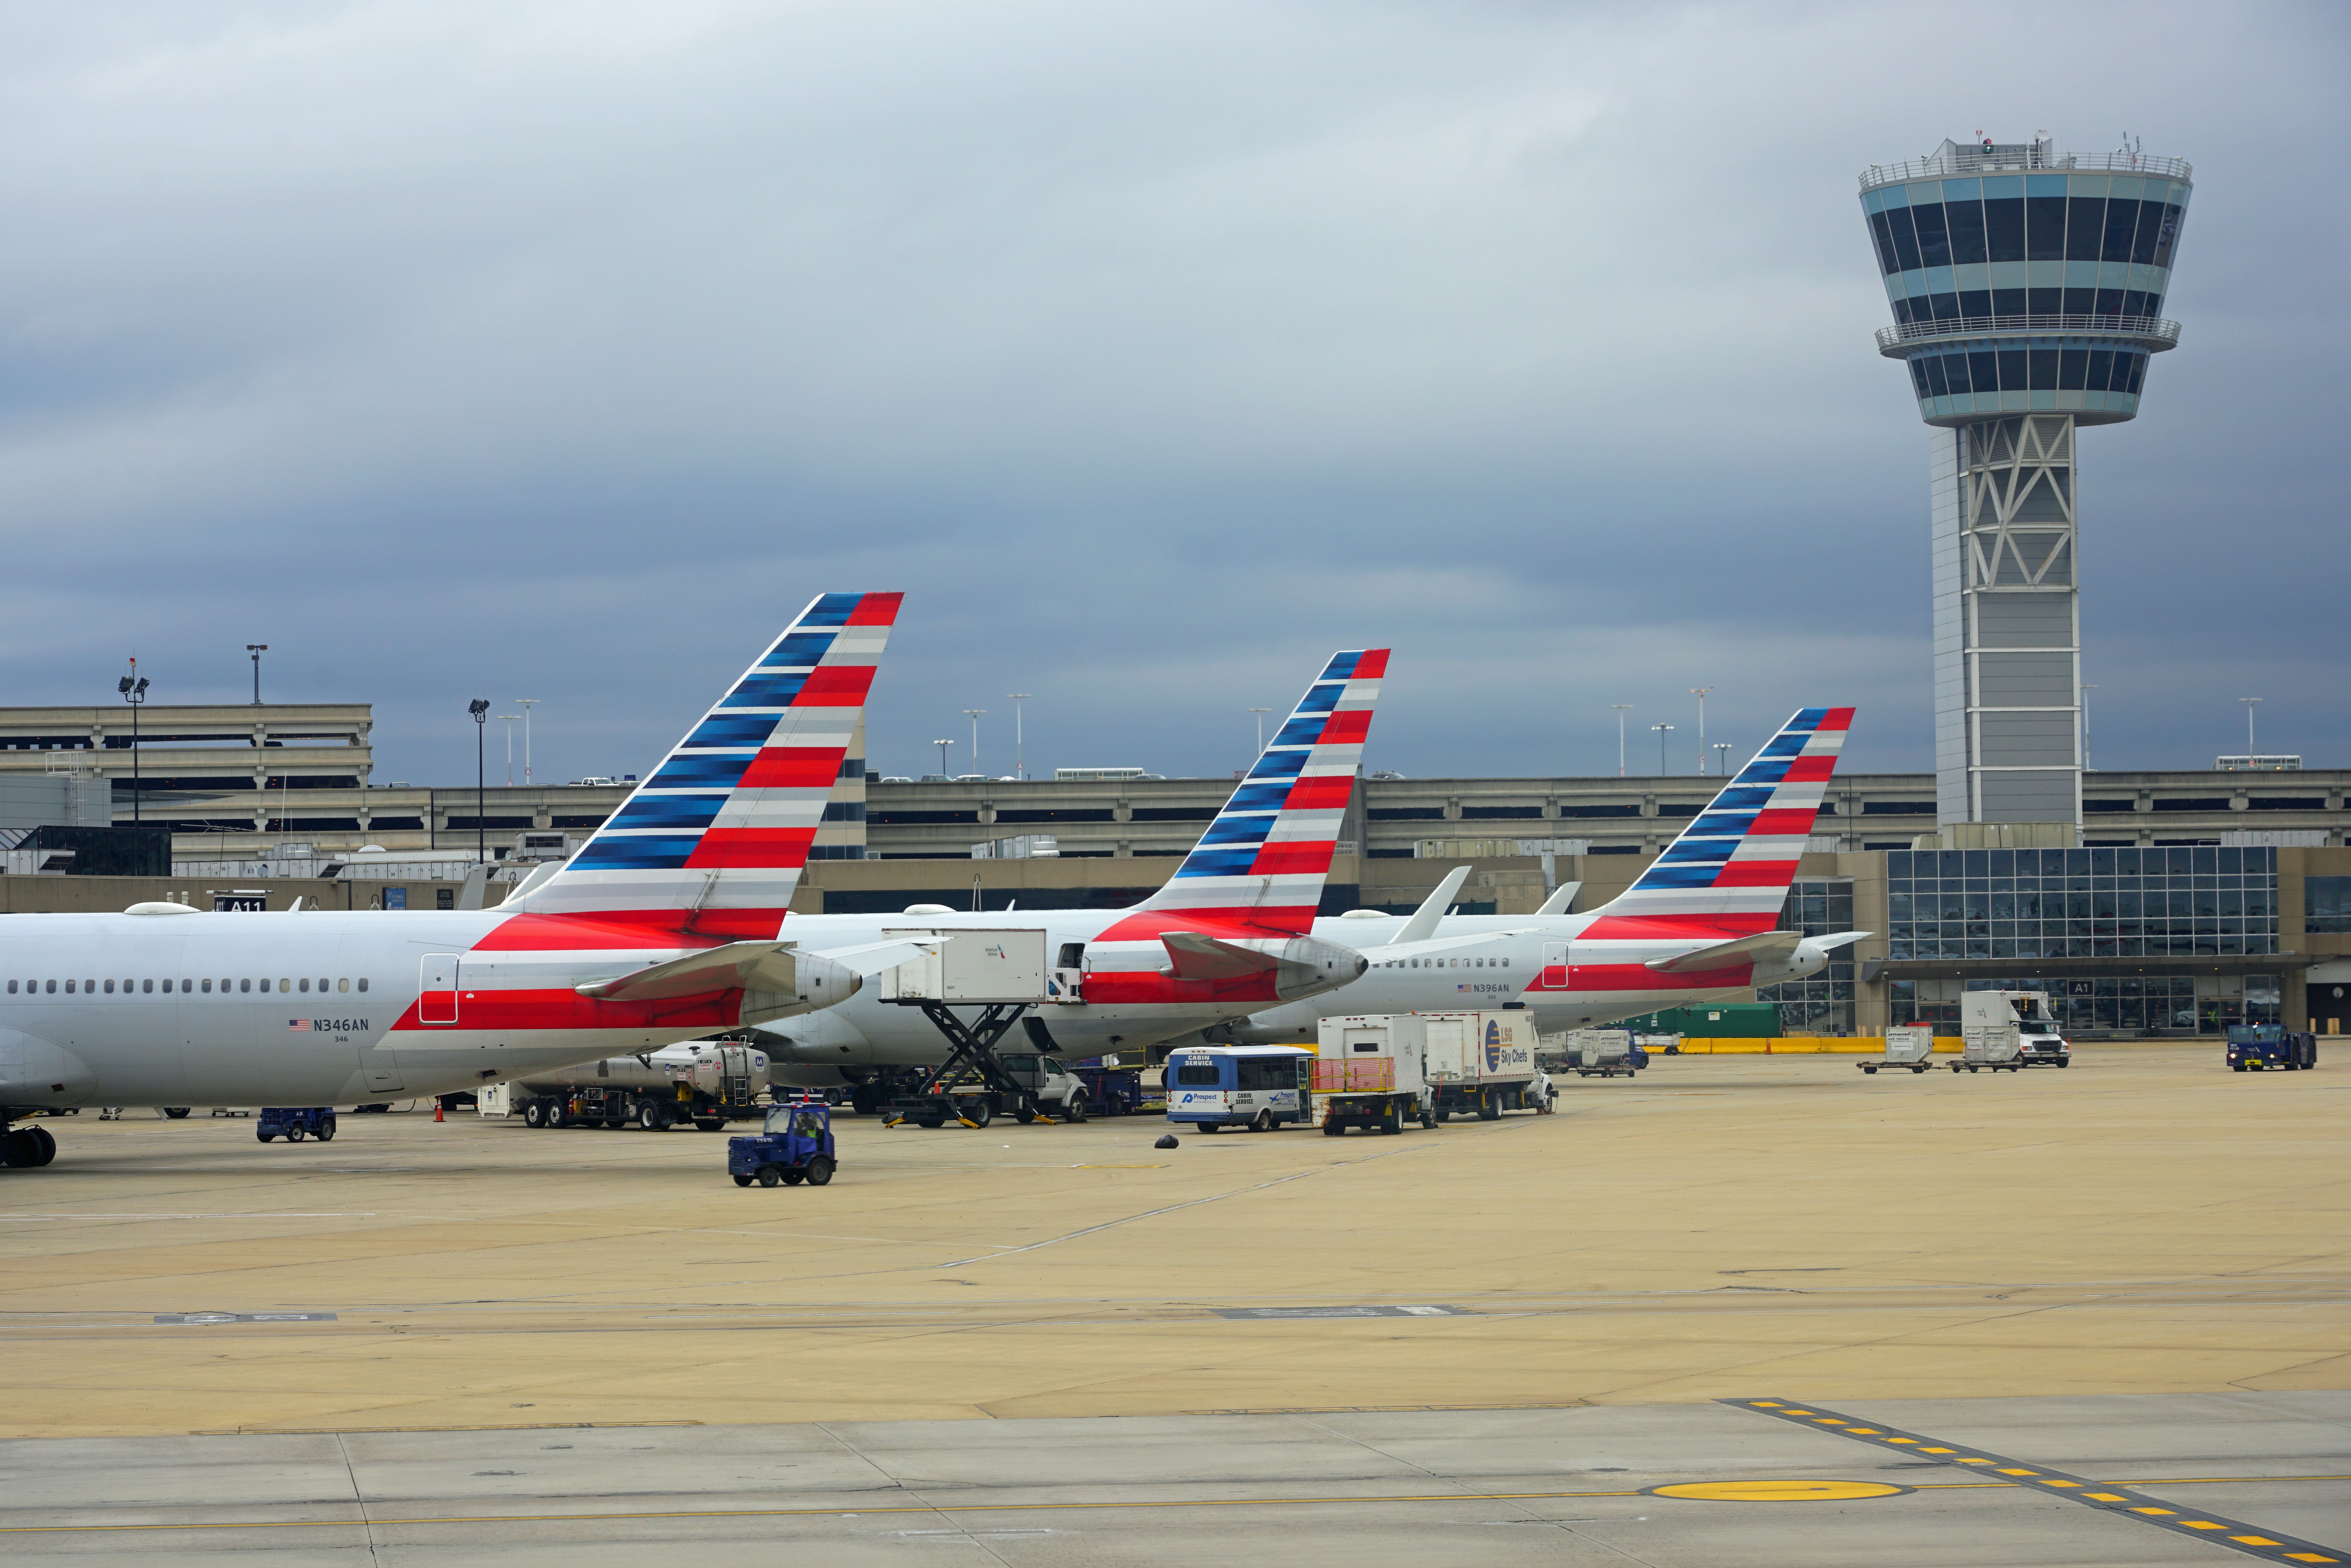 Airplanes from American Airlines (AA) at the Philadelphia International Airport